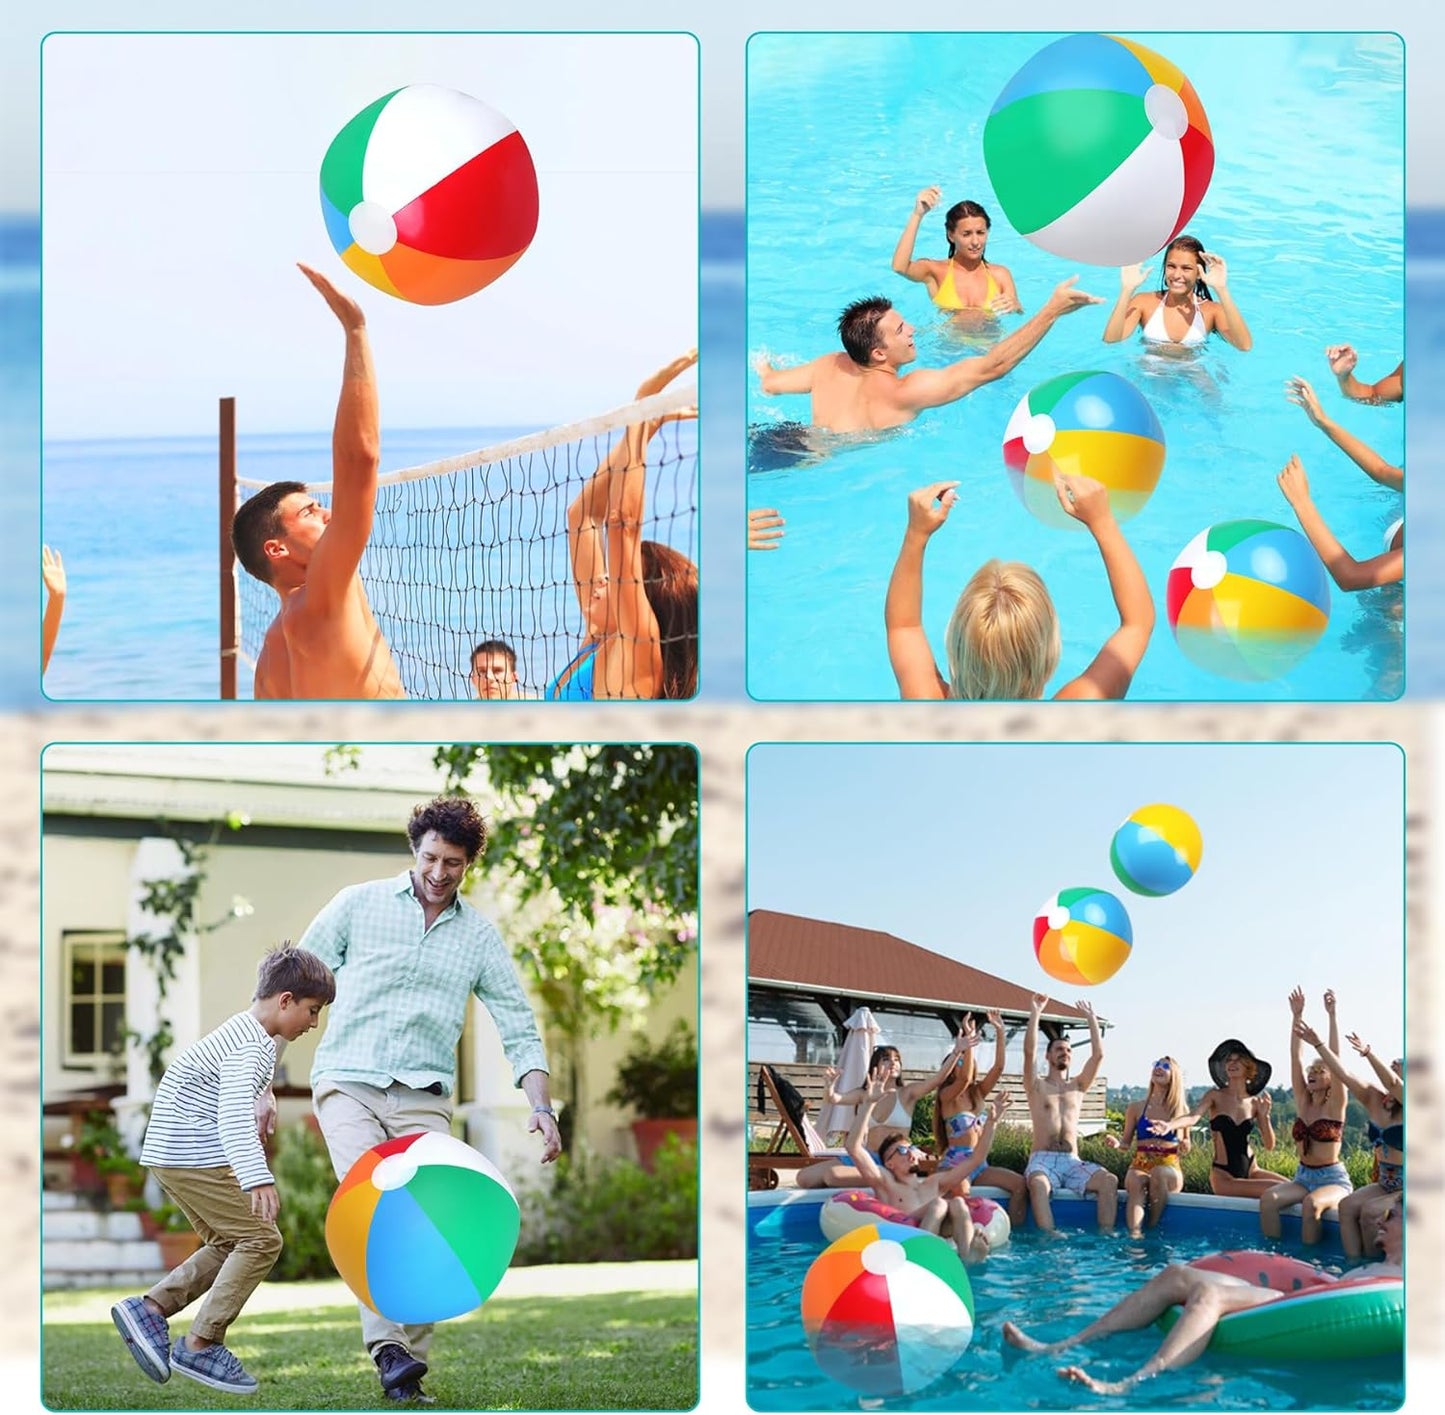 Beach Balls 4 Pack 17" Rainbow Color Pool Toys Inflatable Pool Balls for Summer Party Supplies Decorations Gifts Sport Outdoor Toys for Adults Kid